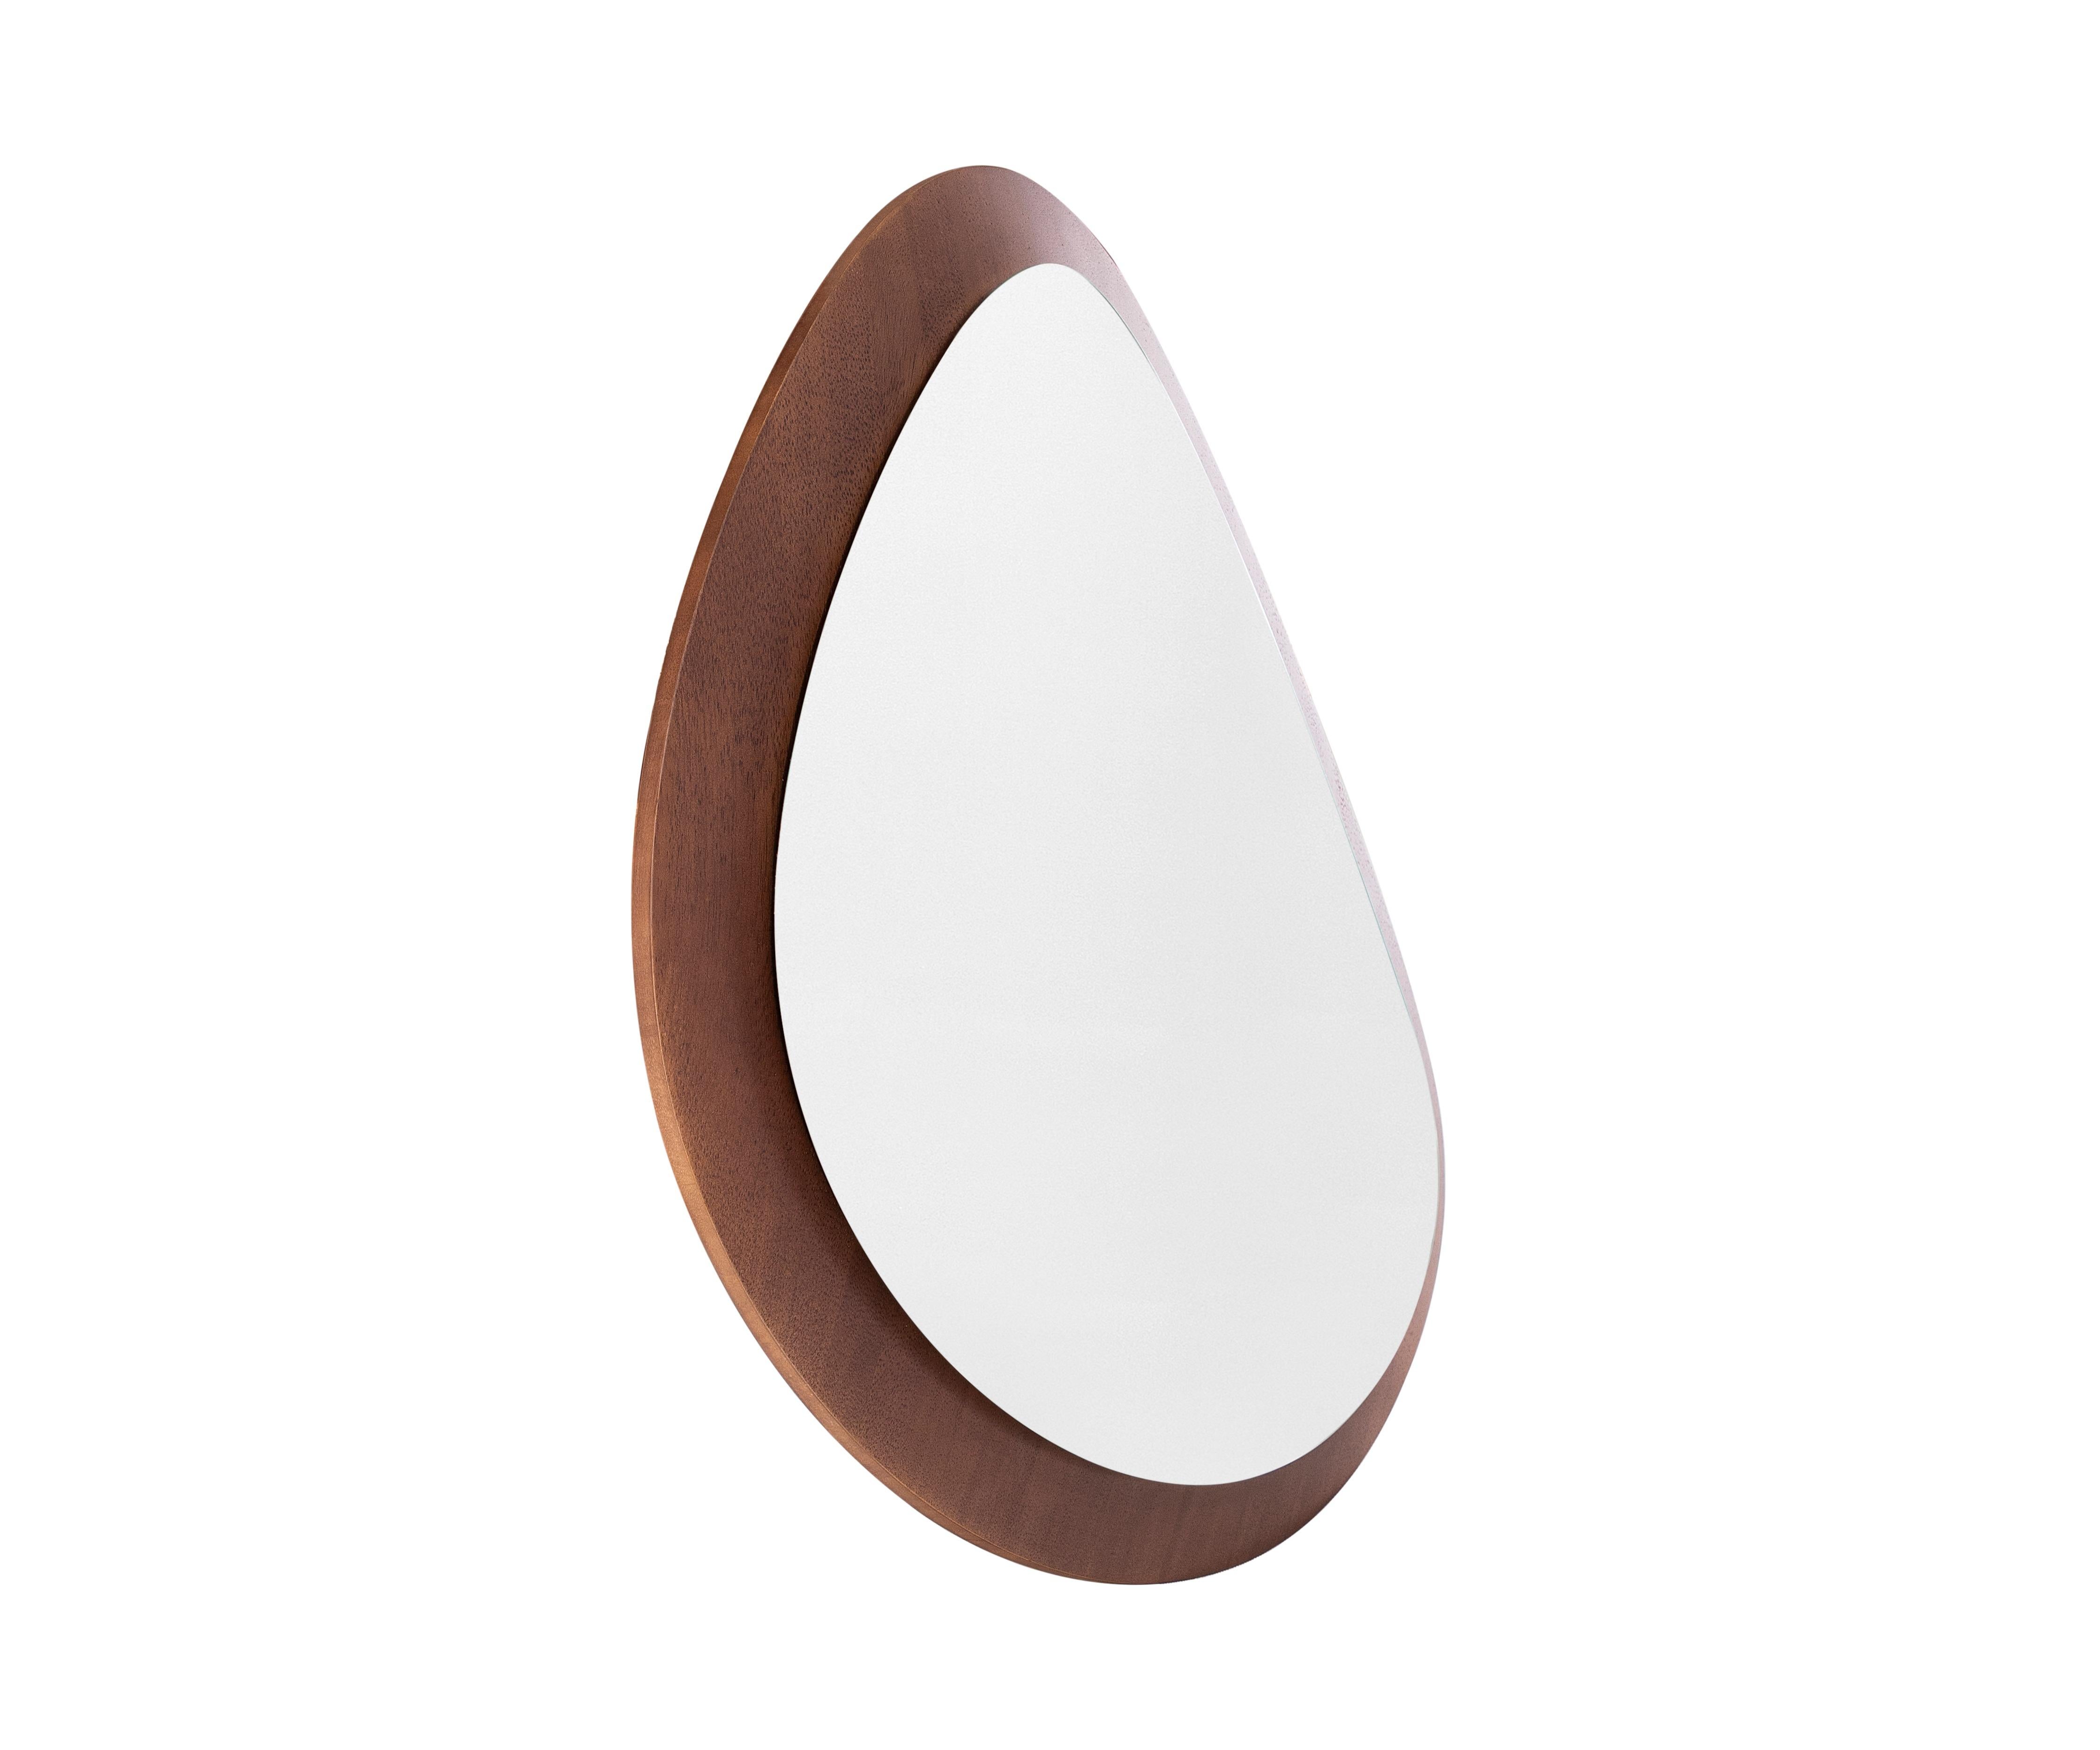 Pante Mirror in Walnut Wood Finish, Set of 4 For Sale 1